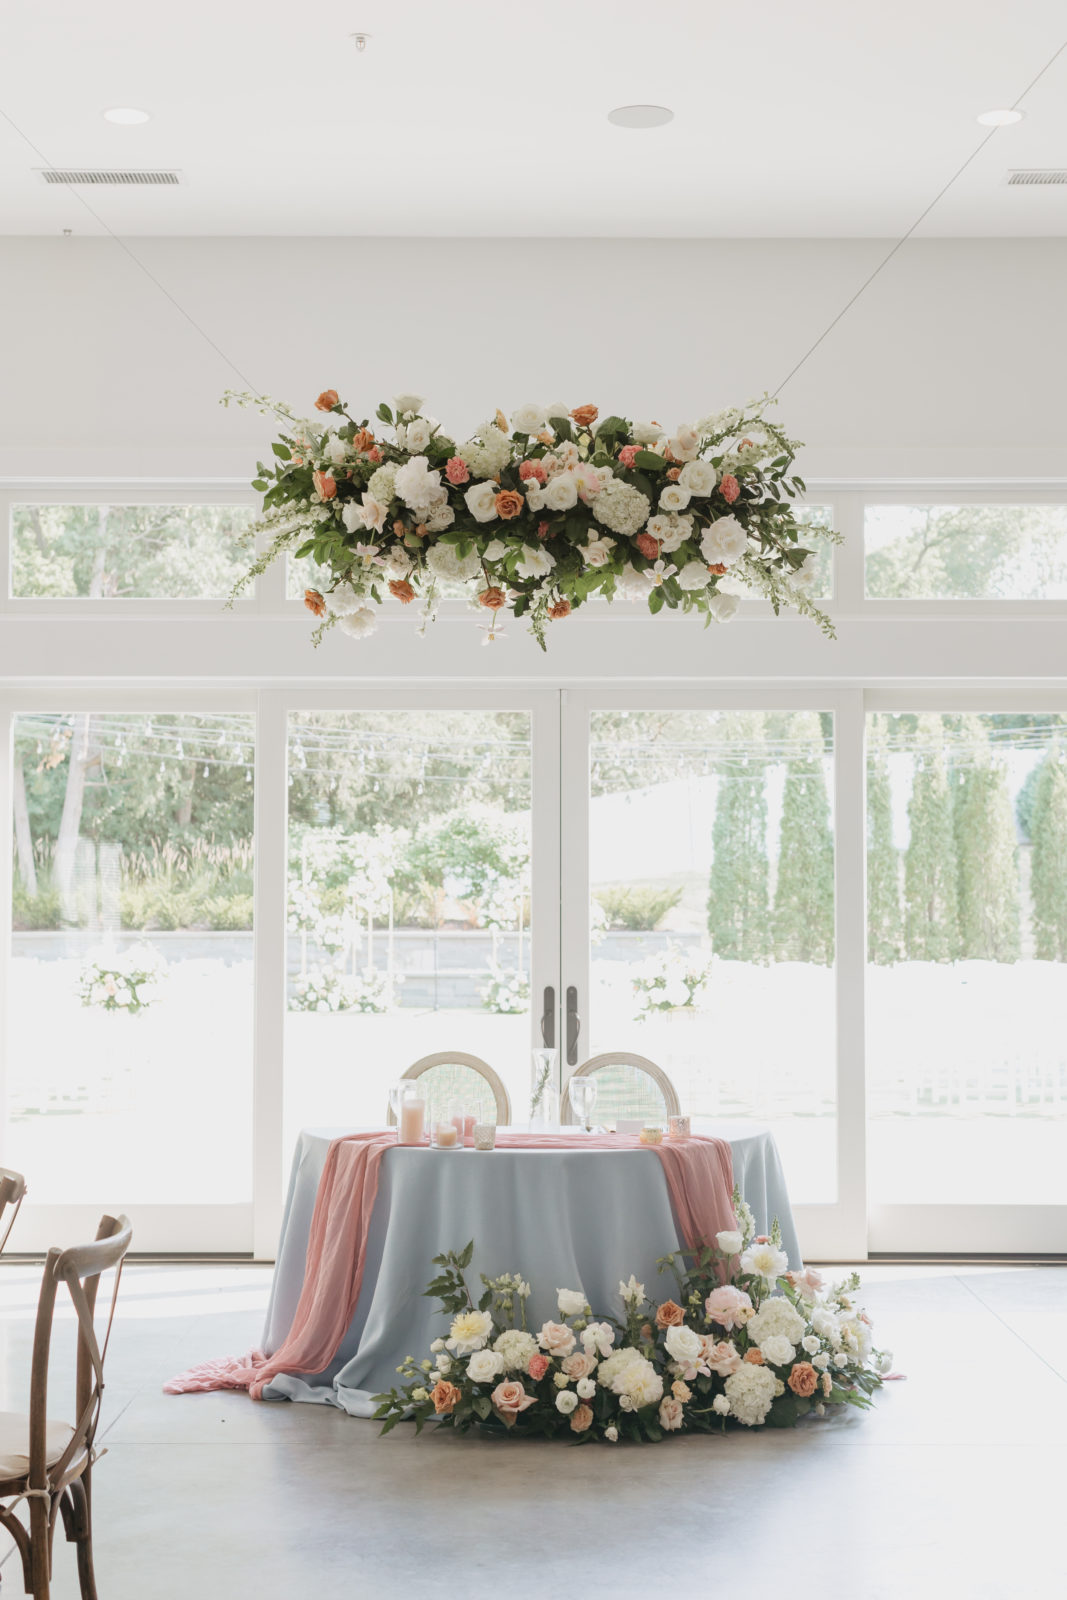 Tablescape inspiration for a spring wedding